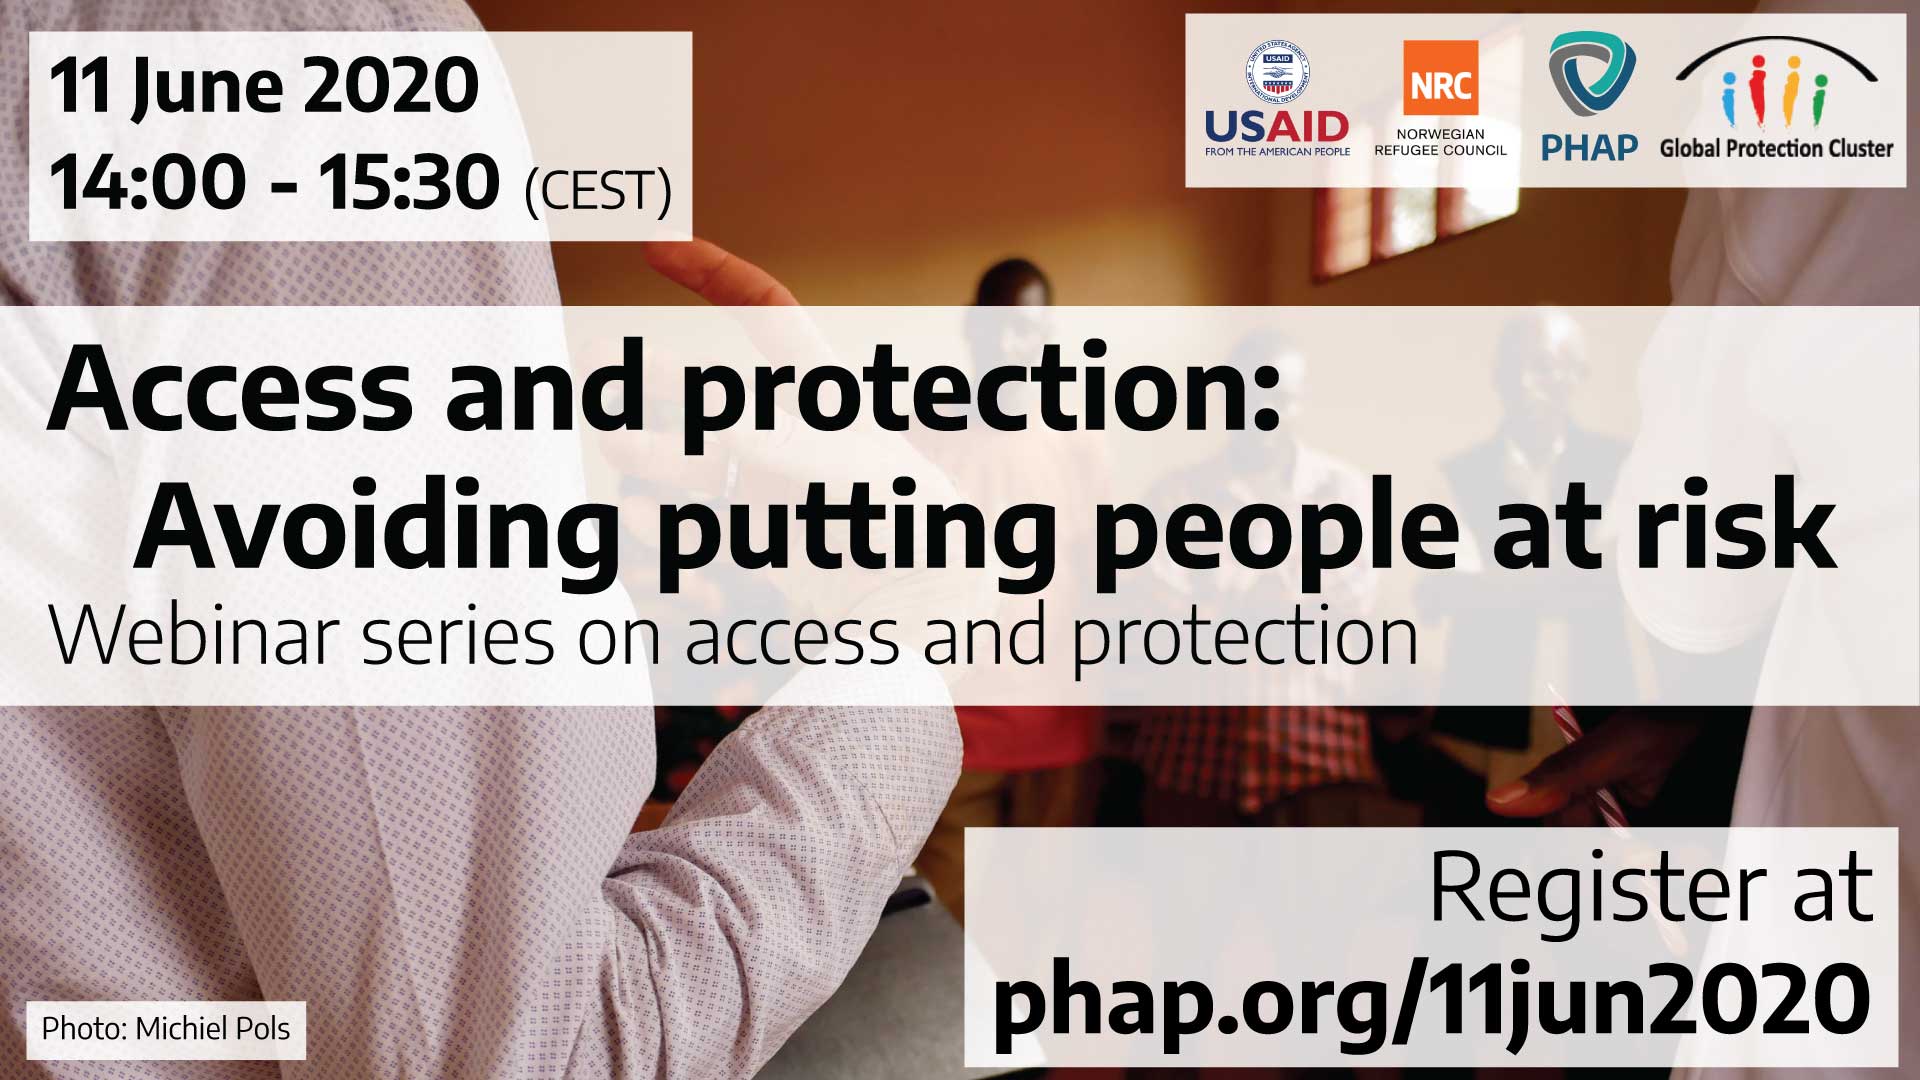 Banner for the webinar Access and protection: Avoiding putting people at risk